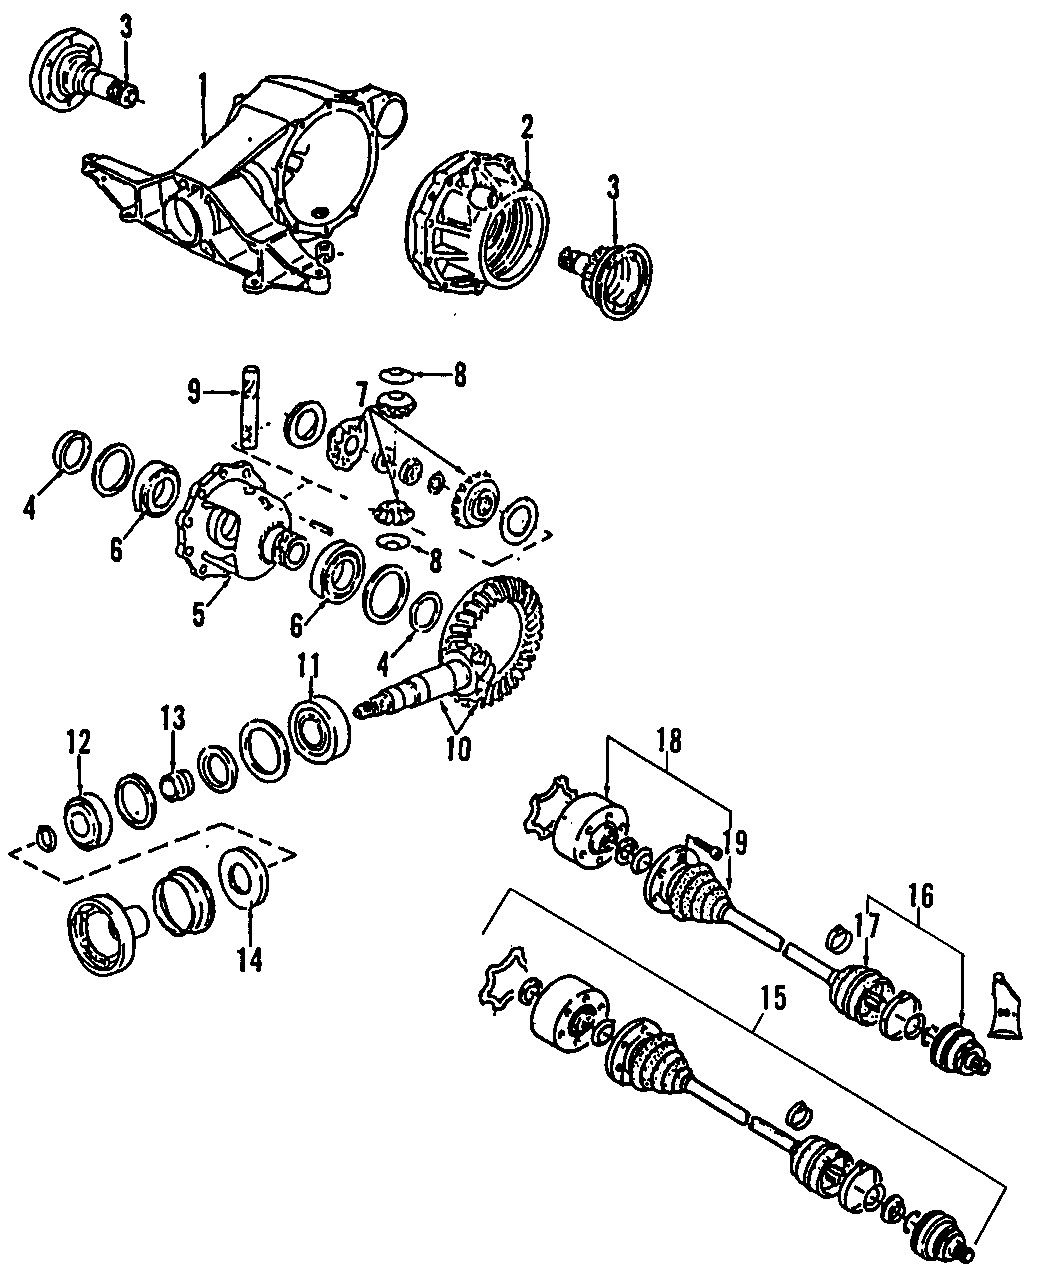 9DRIVE AXLES. REAR AXLE. AXLE SHAFTS & JOINTS. DIFFERENTIAL. PROPELLER SHAFT.https://images.simplepart.com/images/parts/motor/fullsize/F205080.png